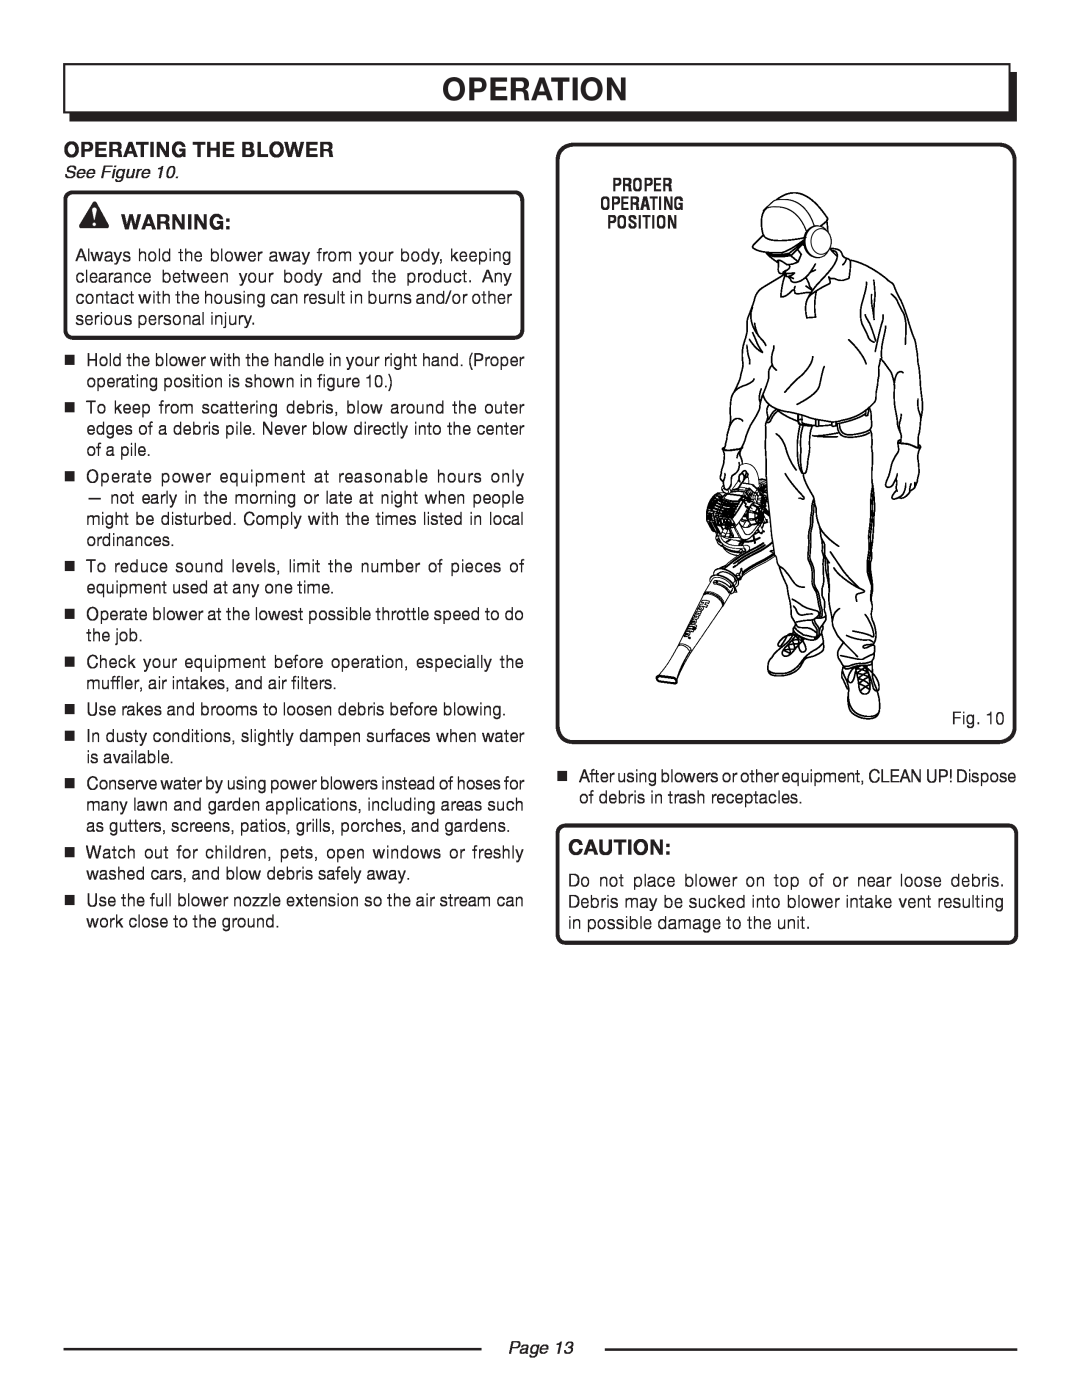 Homelite UT08550, UT08951 manual operation, OPERATING the blower, See Figure, proper operating position, Page 